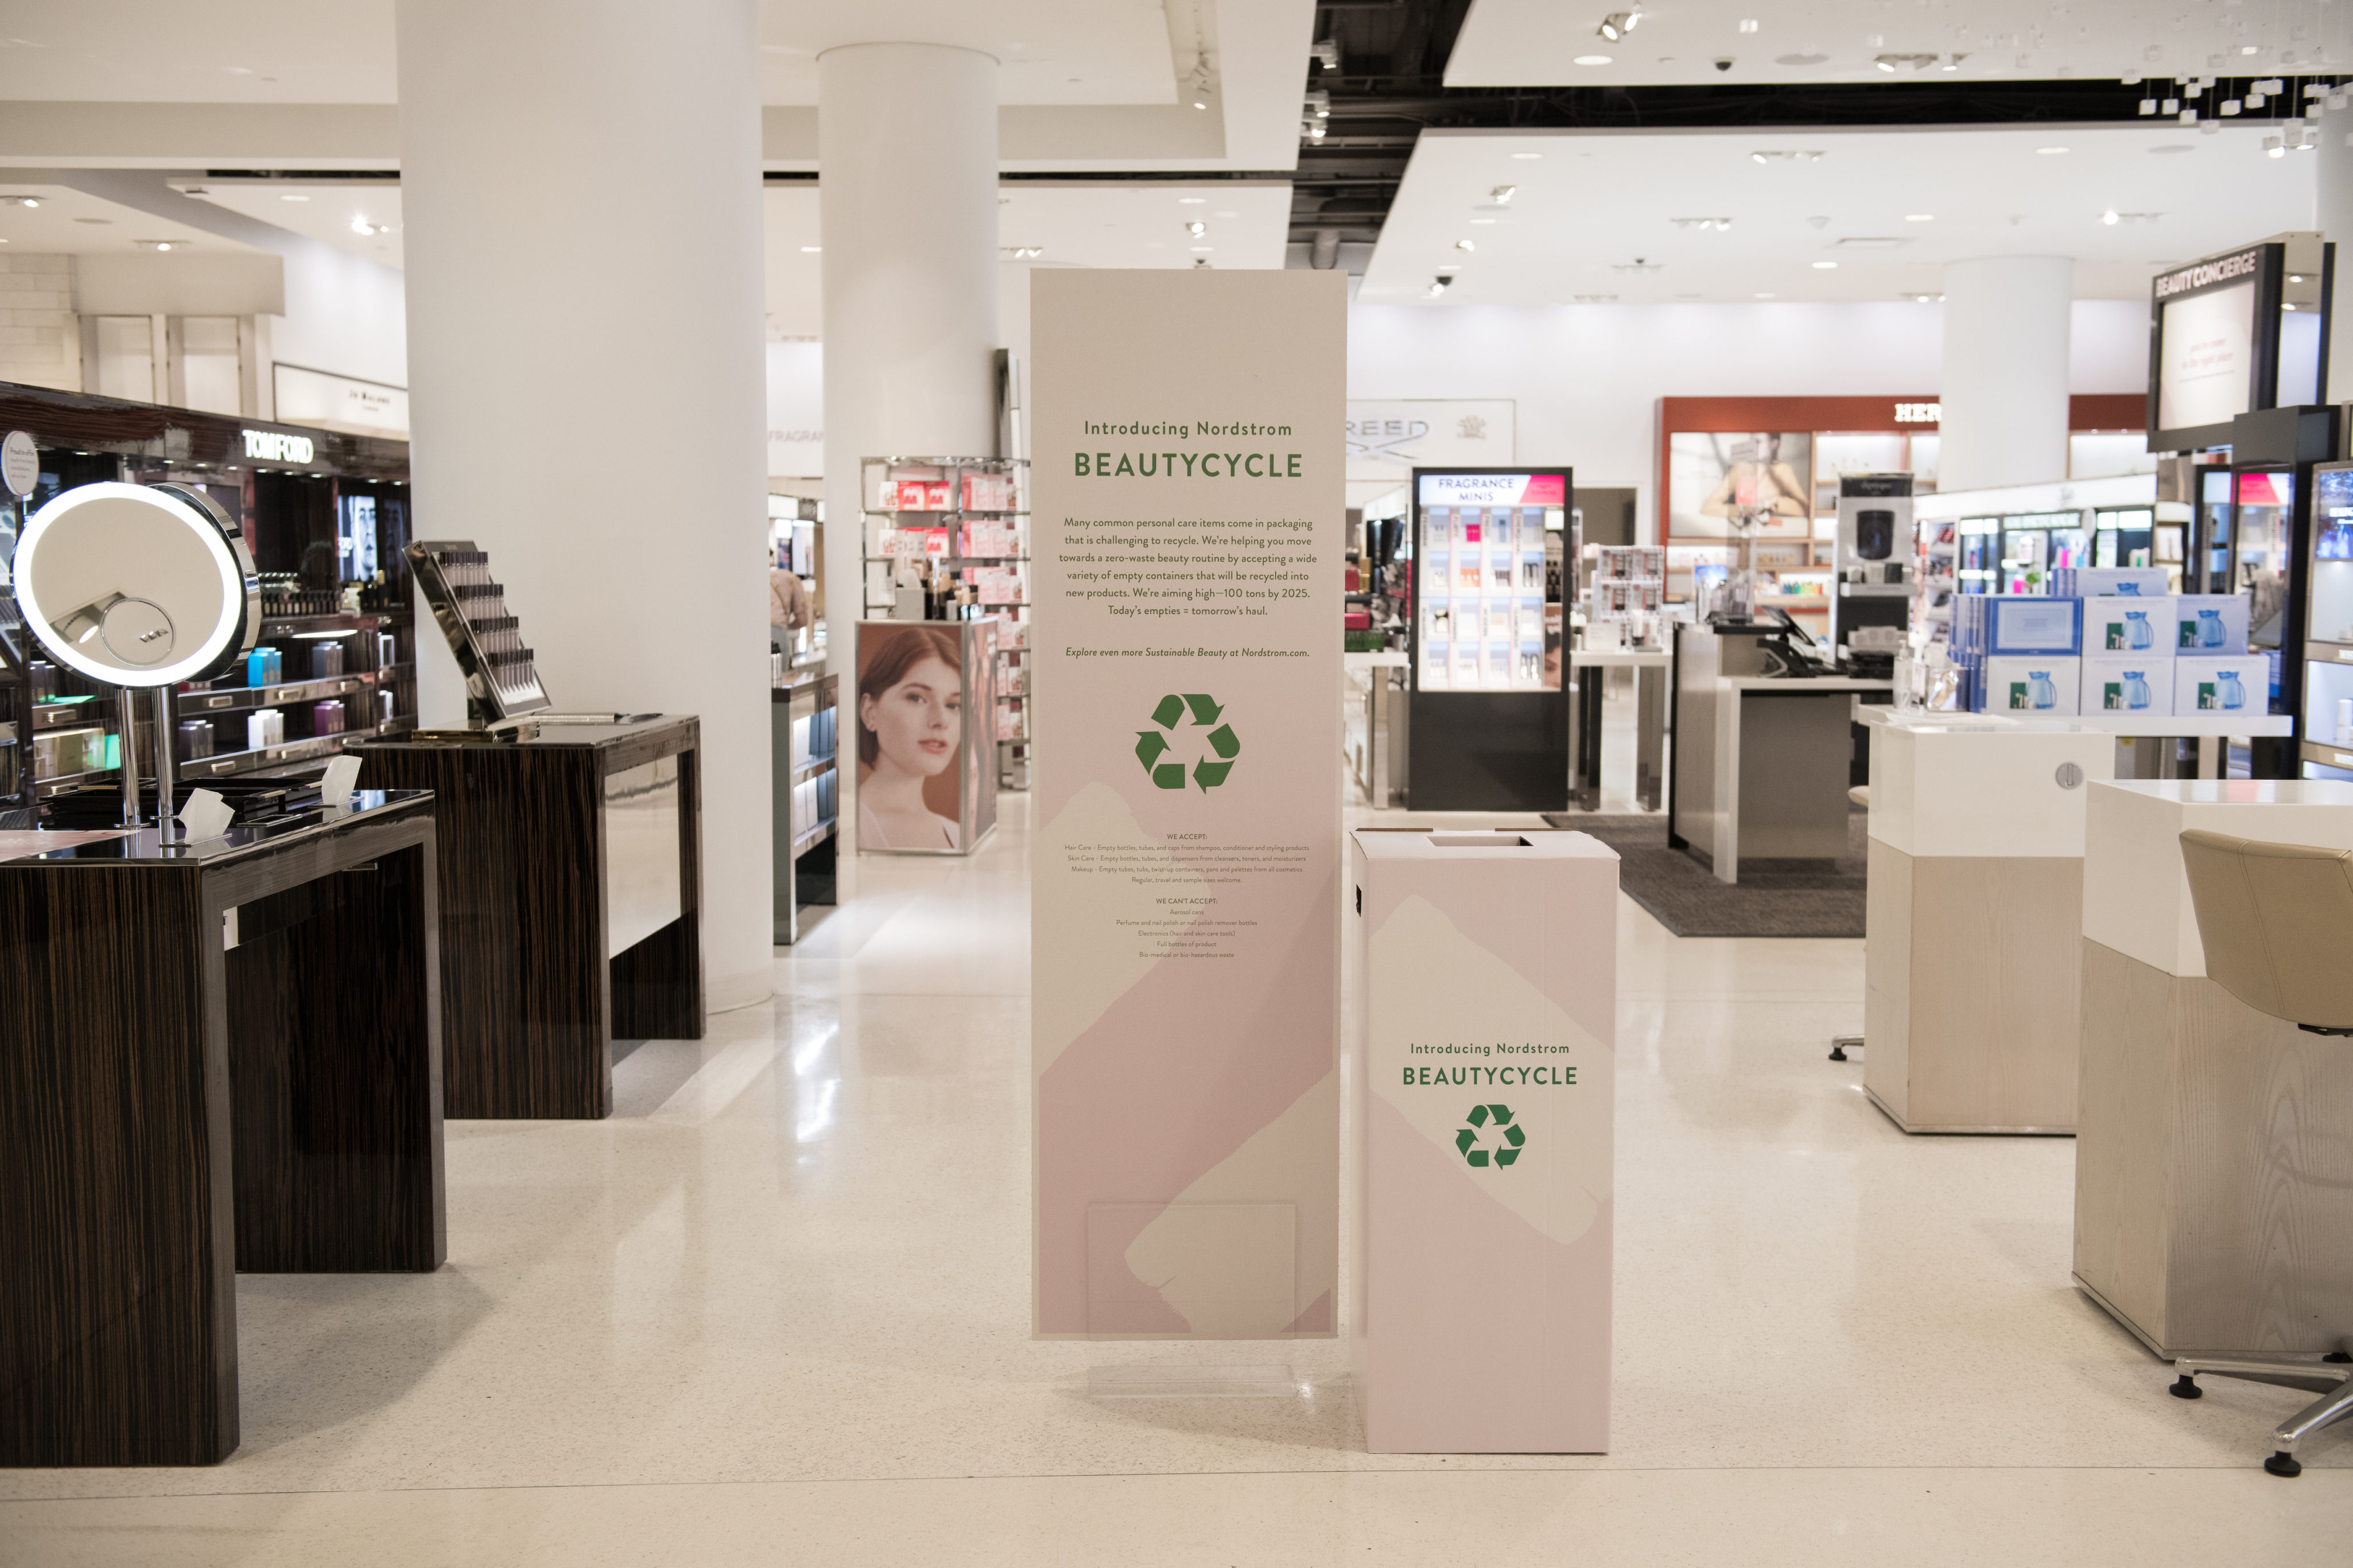 Nordstrom Beautycycle Has Officially Launched in Canada